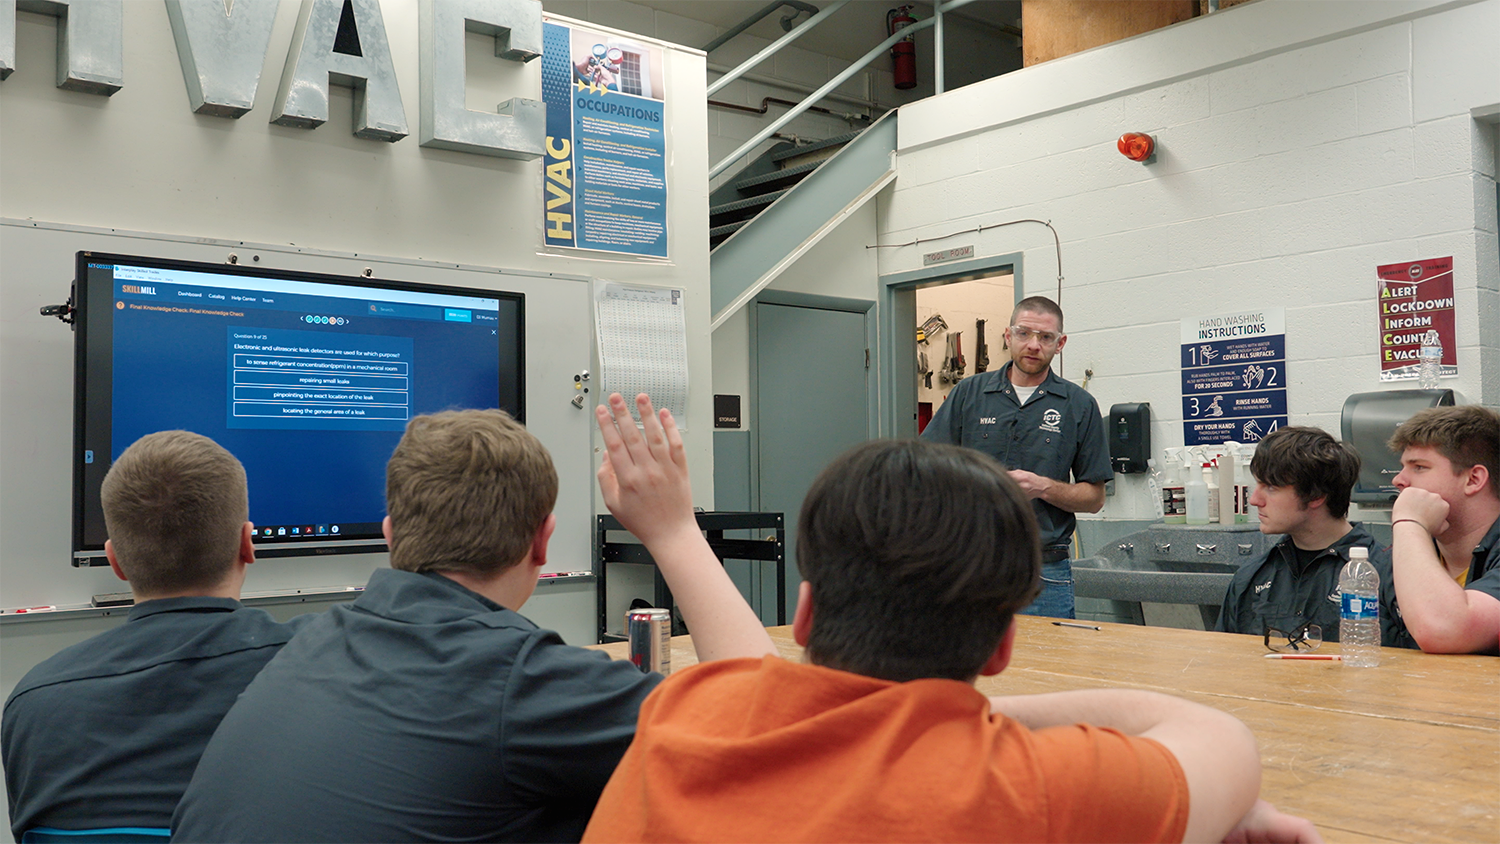 Interactive Training Tech Prepares Students to Confidently Enter Skilled Trades Careers